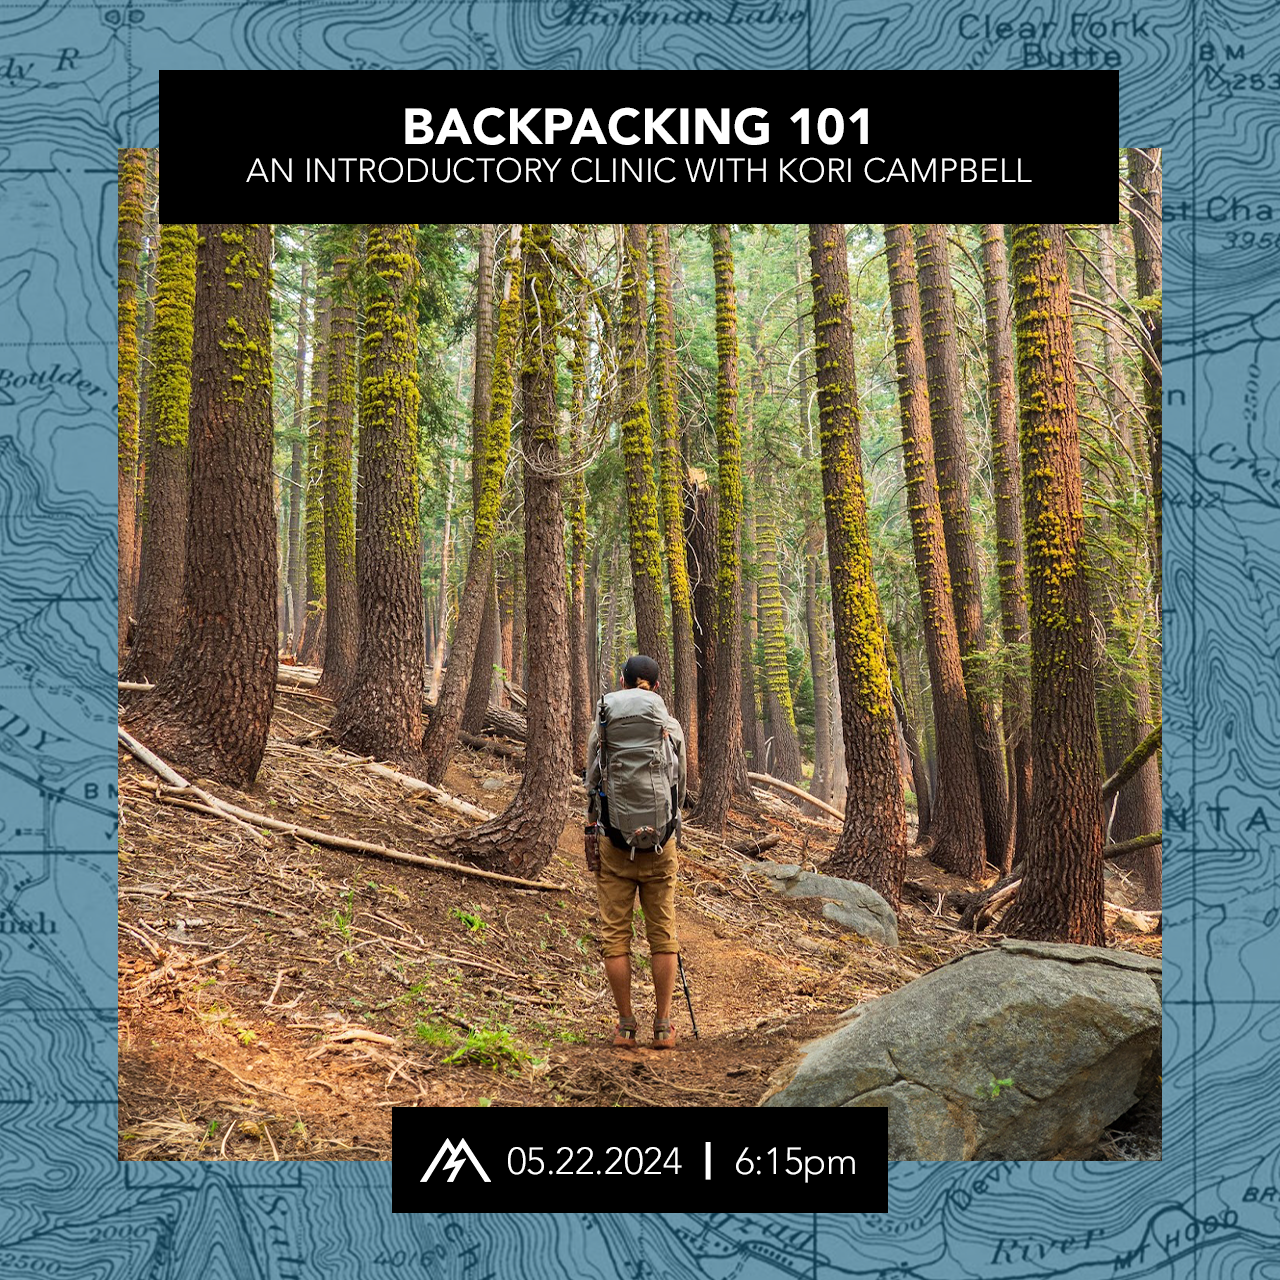 Backpacking 101 with Kori Campbell